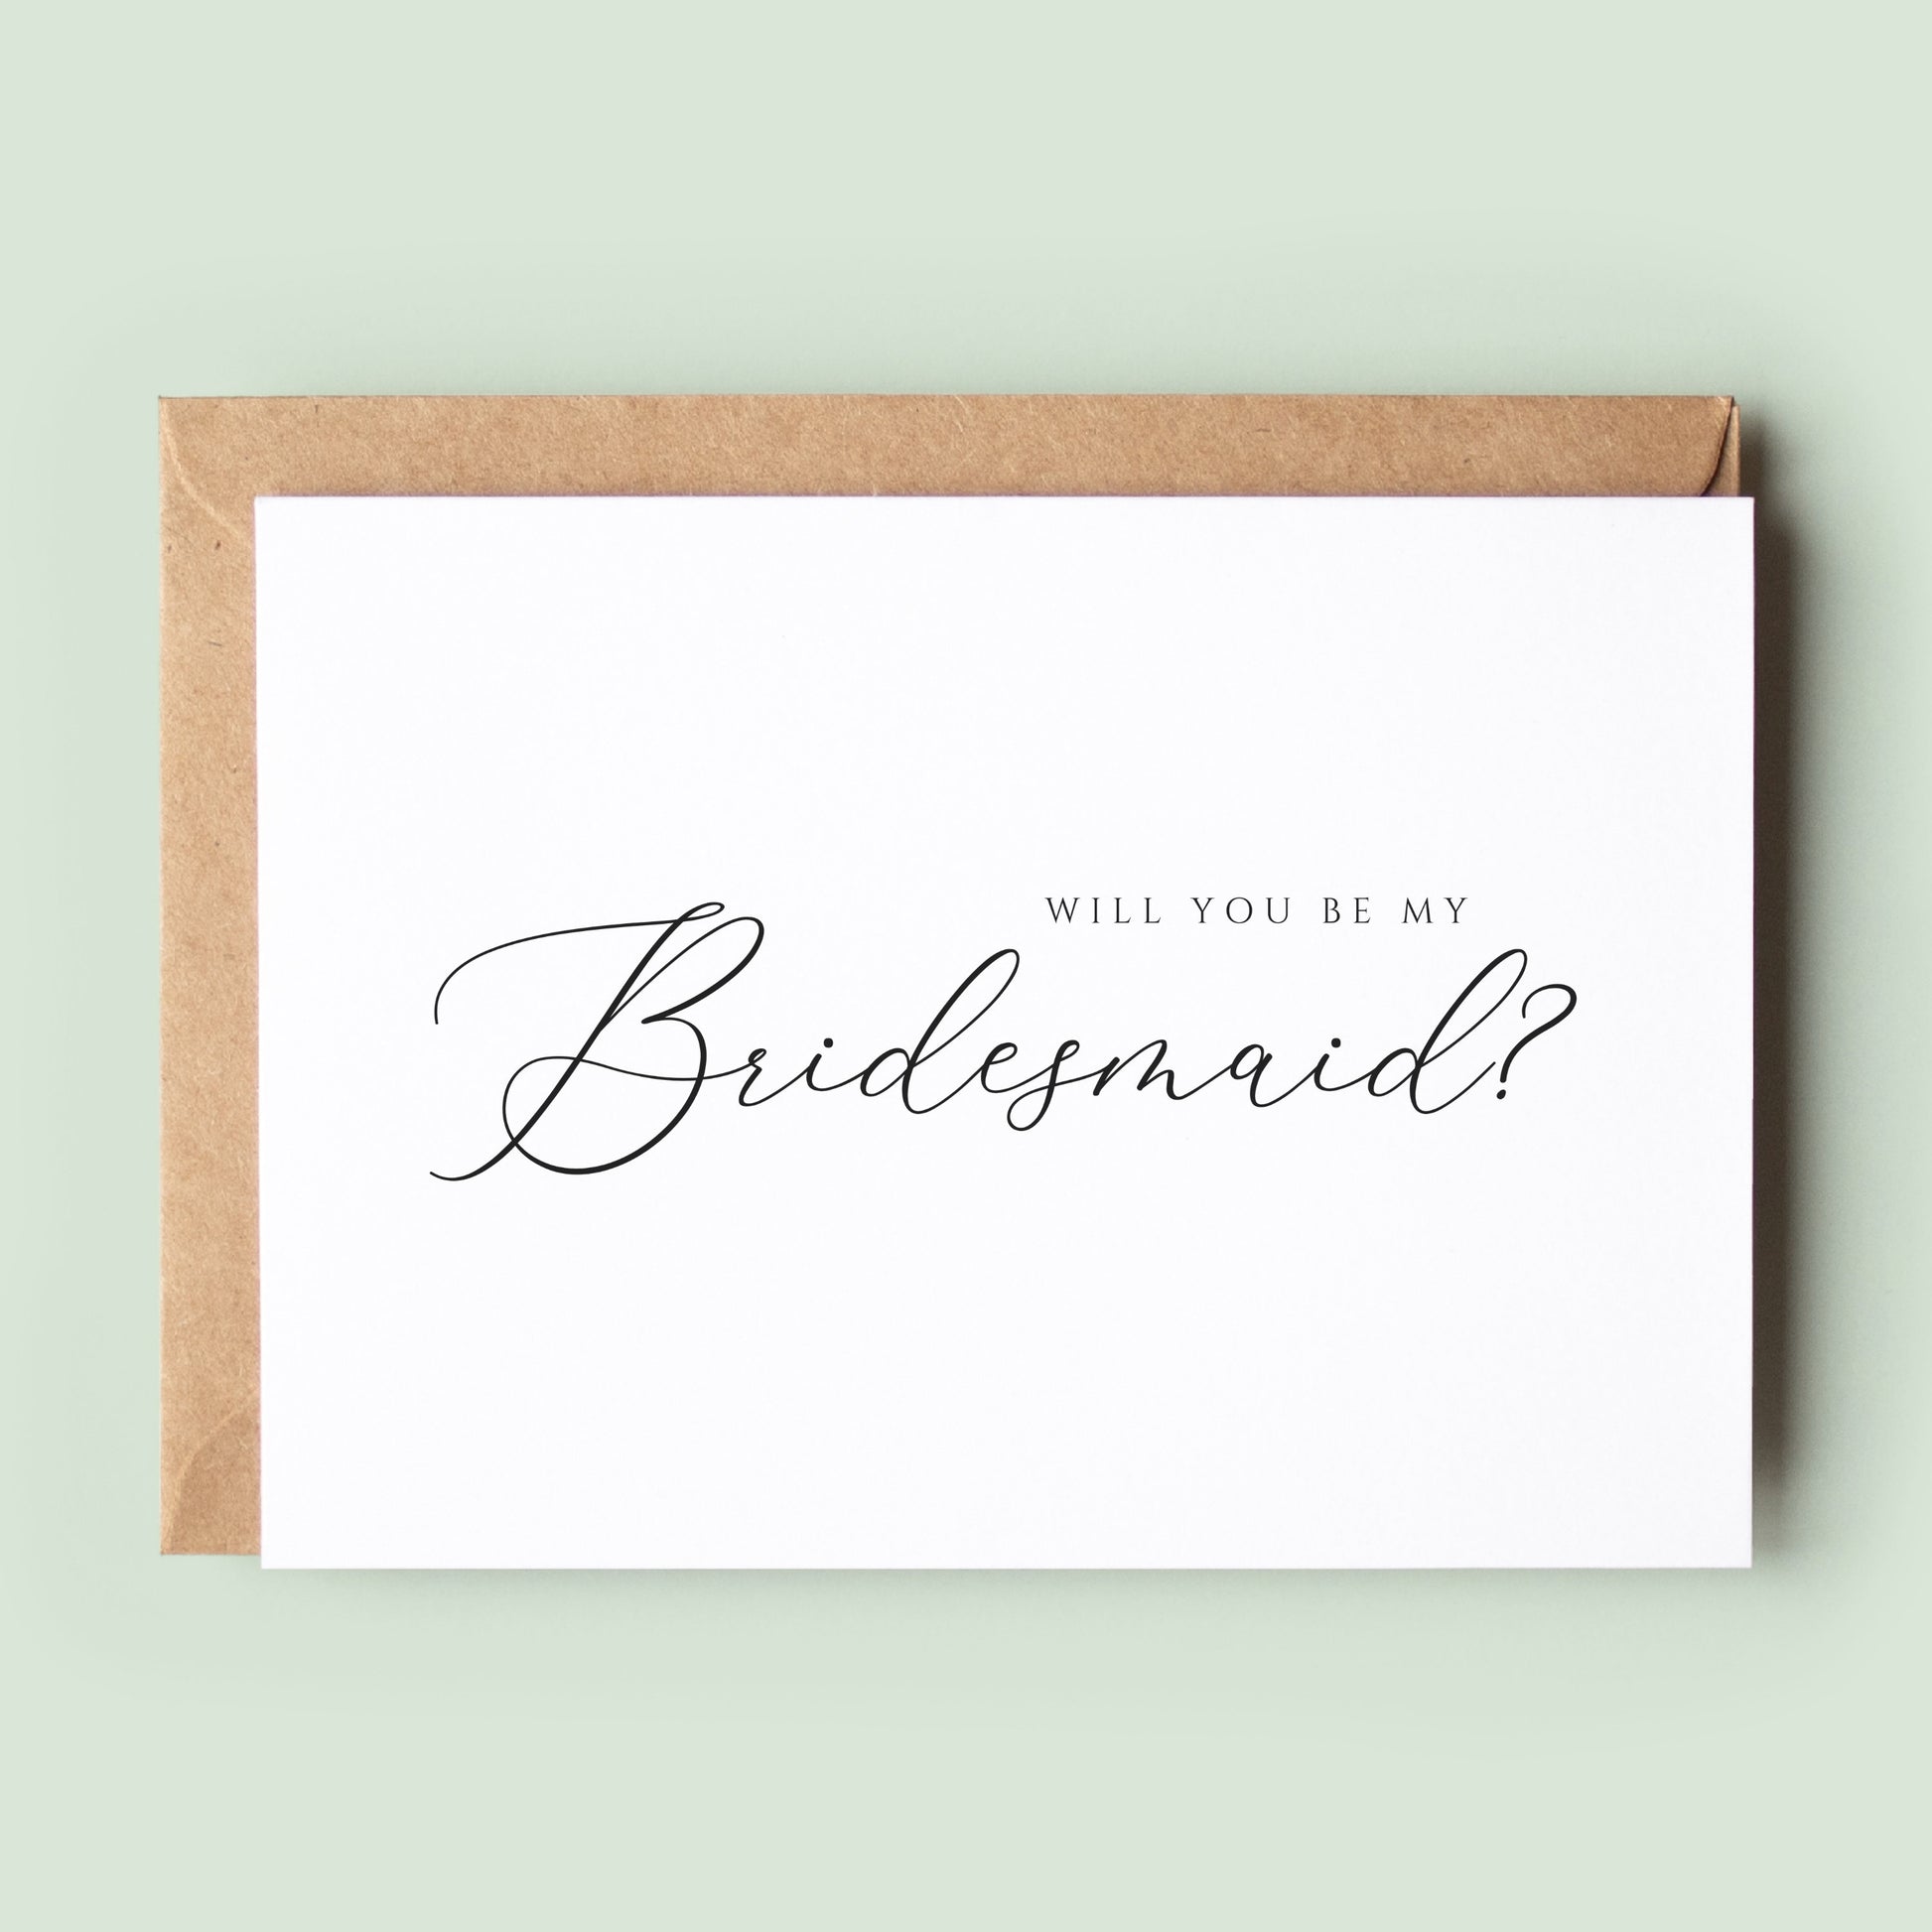 Classic Will You Be My Best Man Card, Will You Be My Best Man Wedding Card, Card To Best Man, Best Man Proposal Card, Greeting Card